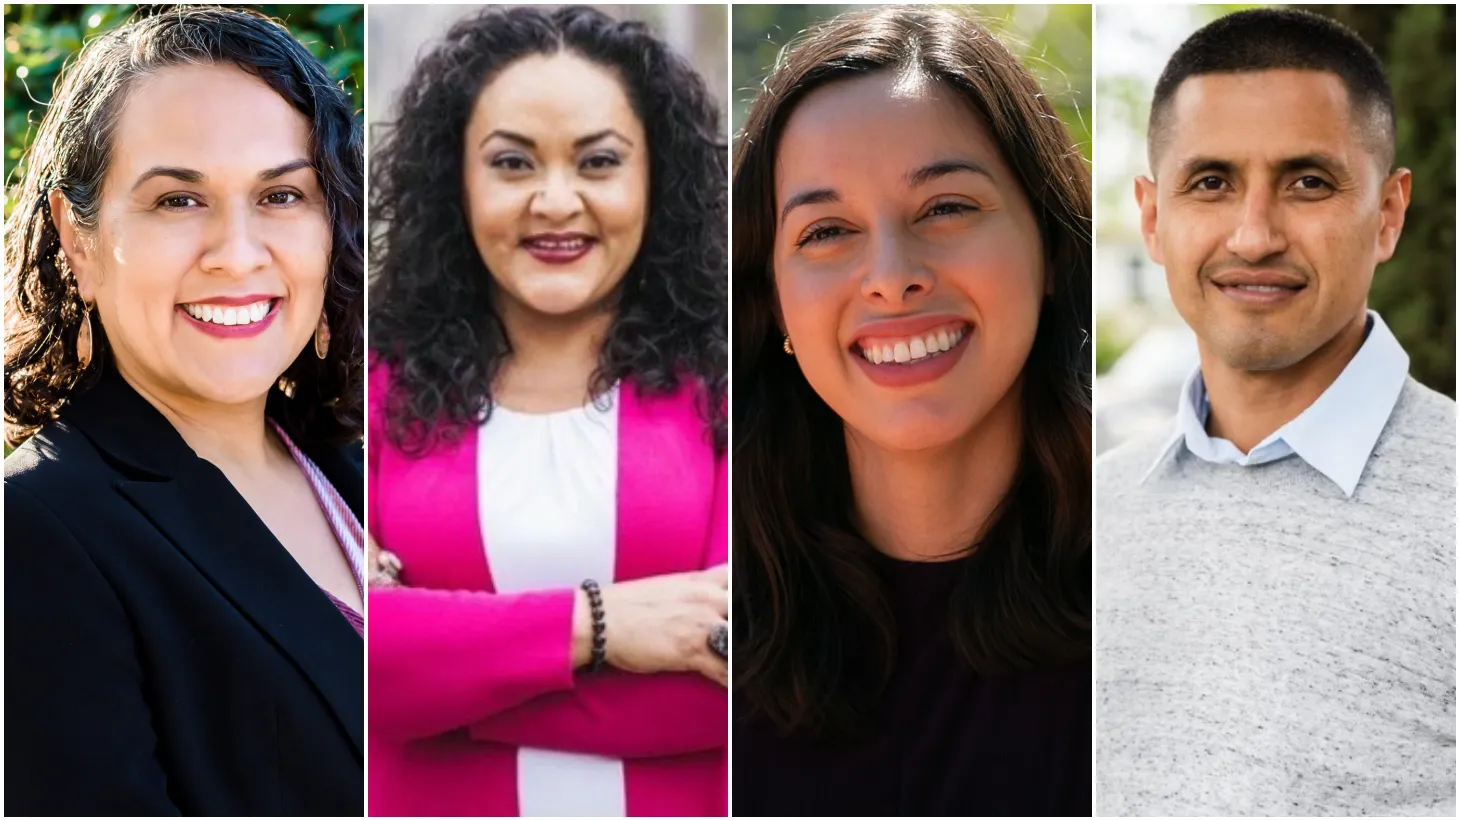 Maria Brenes, Rocio Rivas, Kelly Gonez, and Marvin Rodriguez are running for a seat on the LAUSD school board.